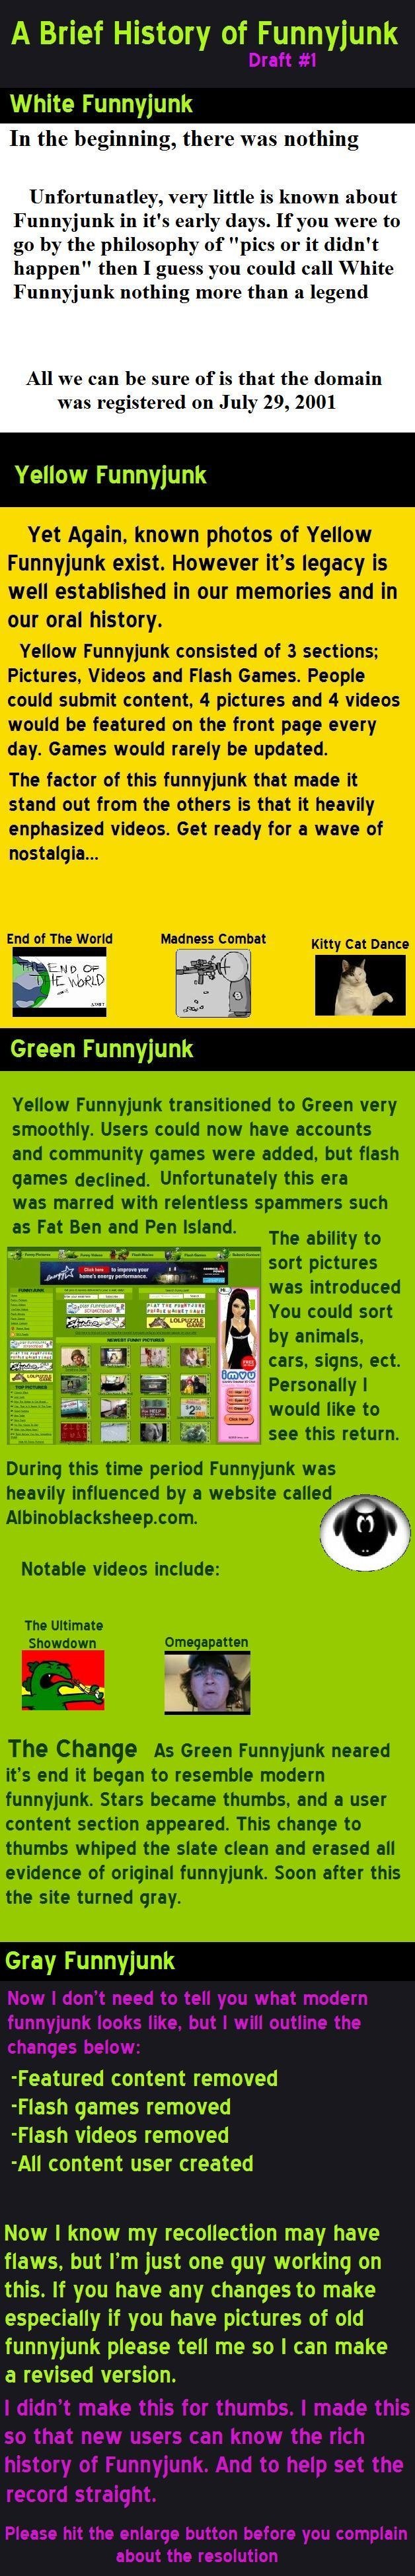 History of FunnyJunk. . A Brief History of Funnyjunk White Funnyjunk In the beginning, there was nothing Unfortunatley, very little is known about Funnyjunk in 